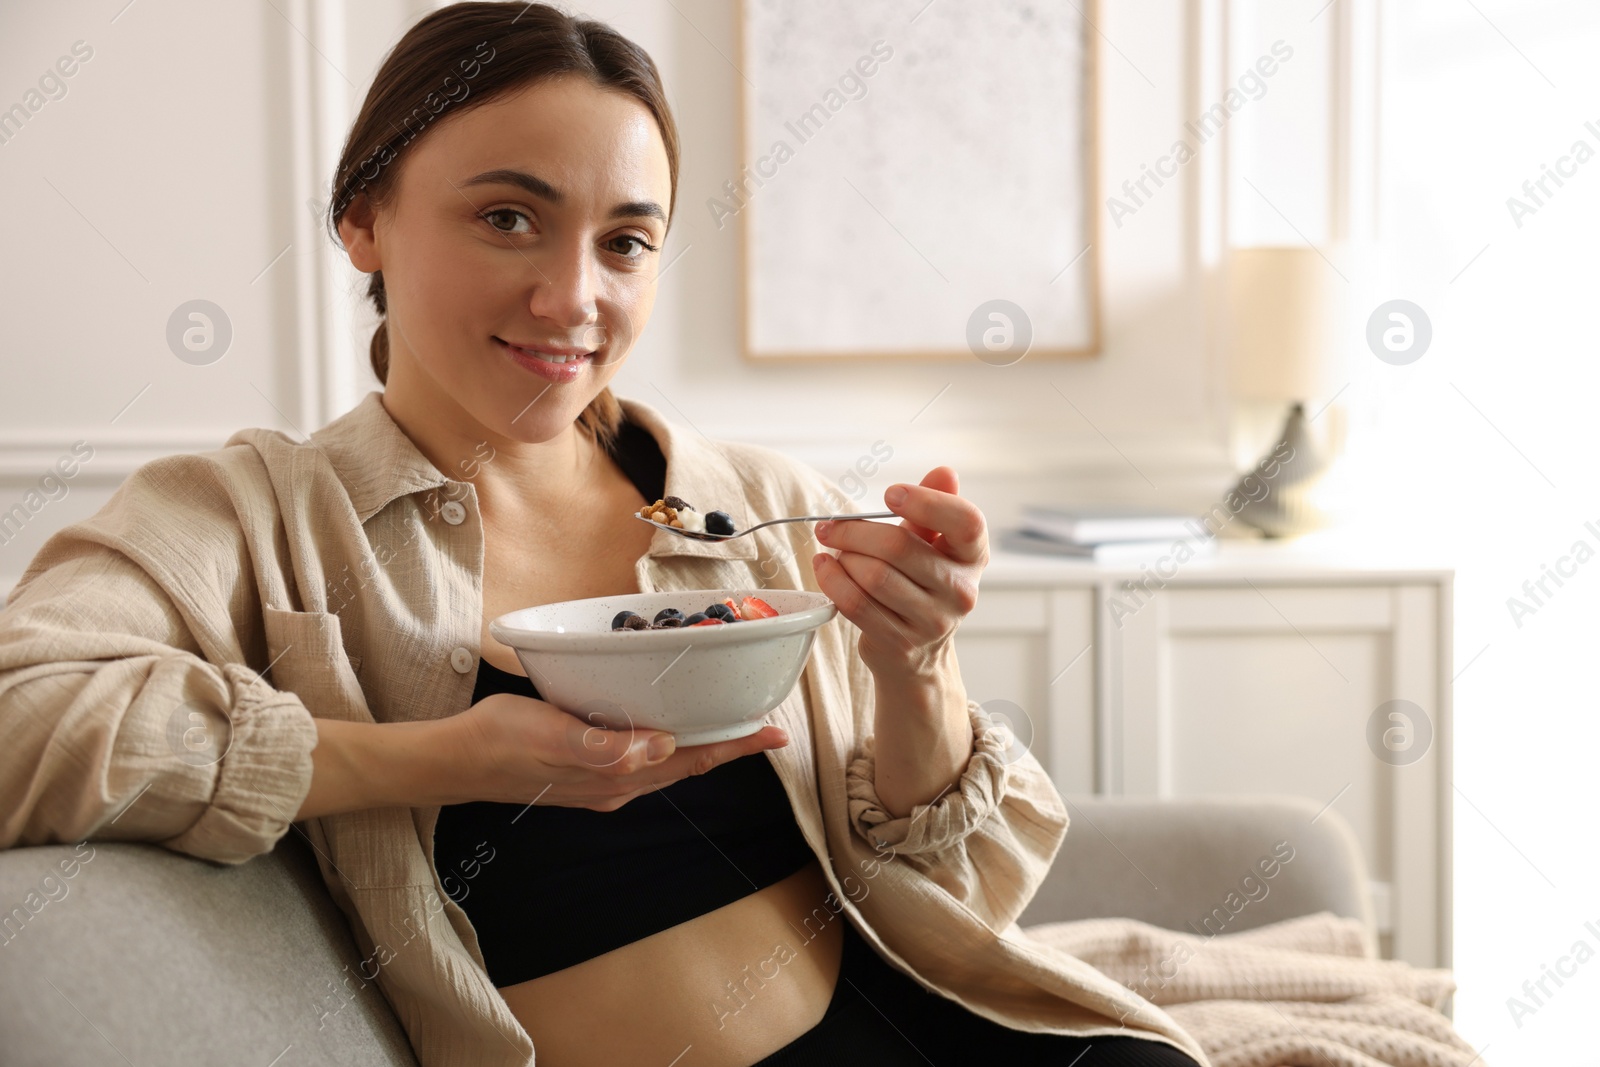 Photo of Woman eating tasty granola with fresh berries and yogurt at home